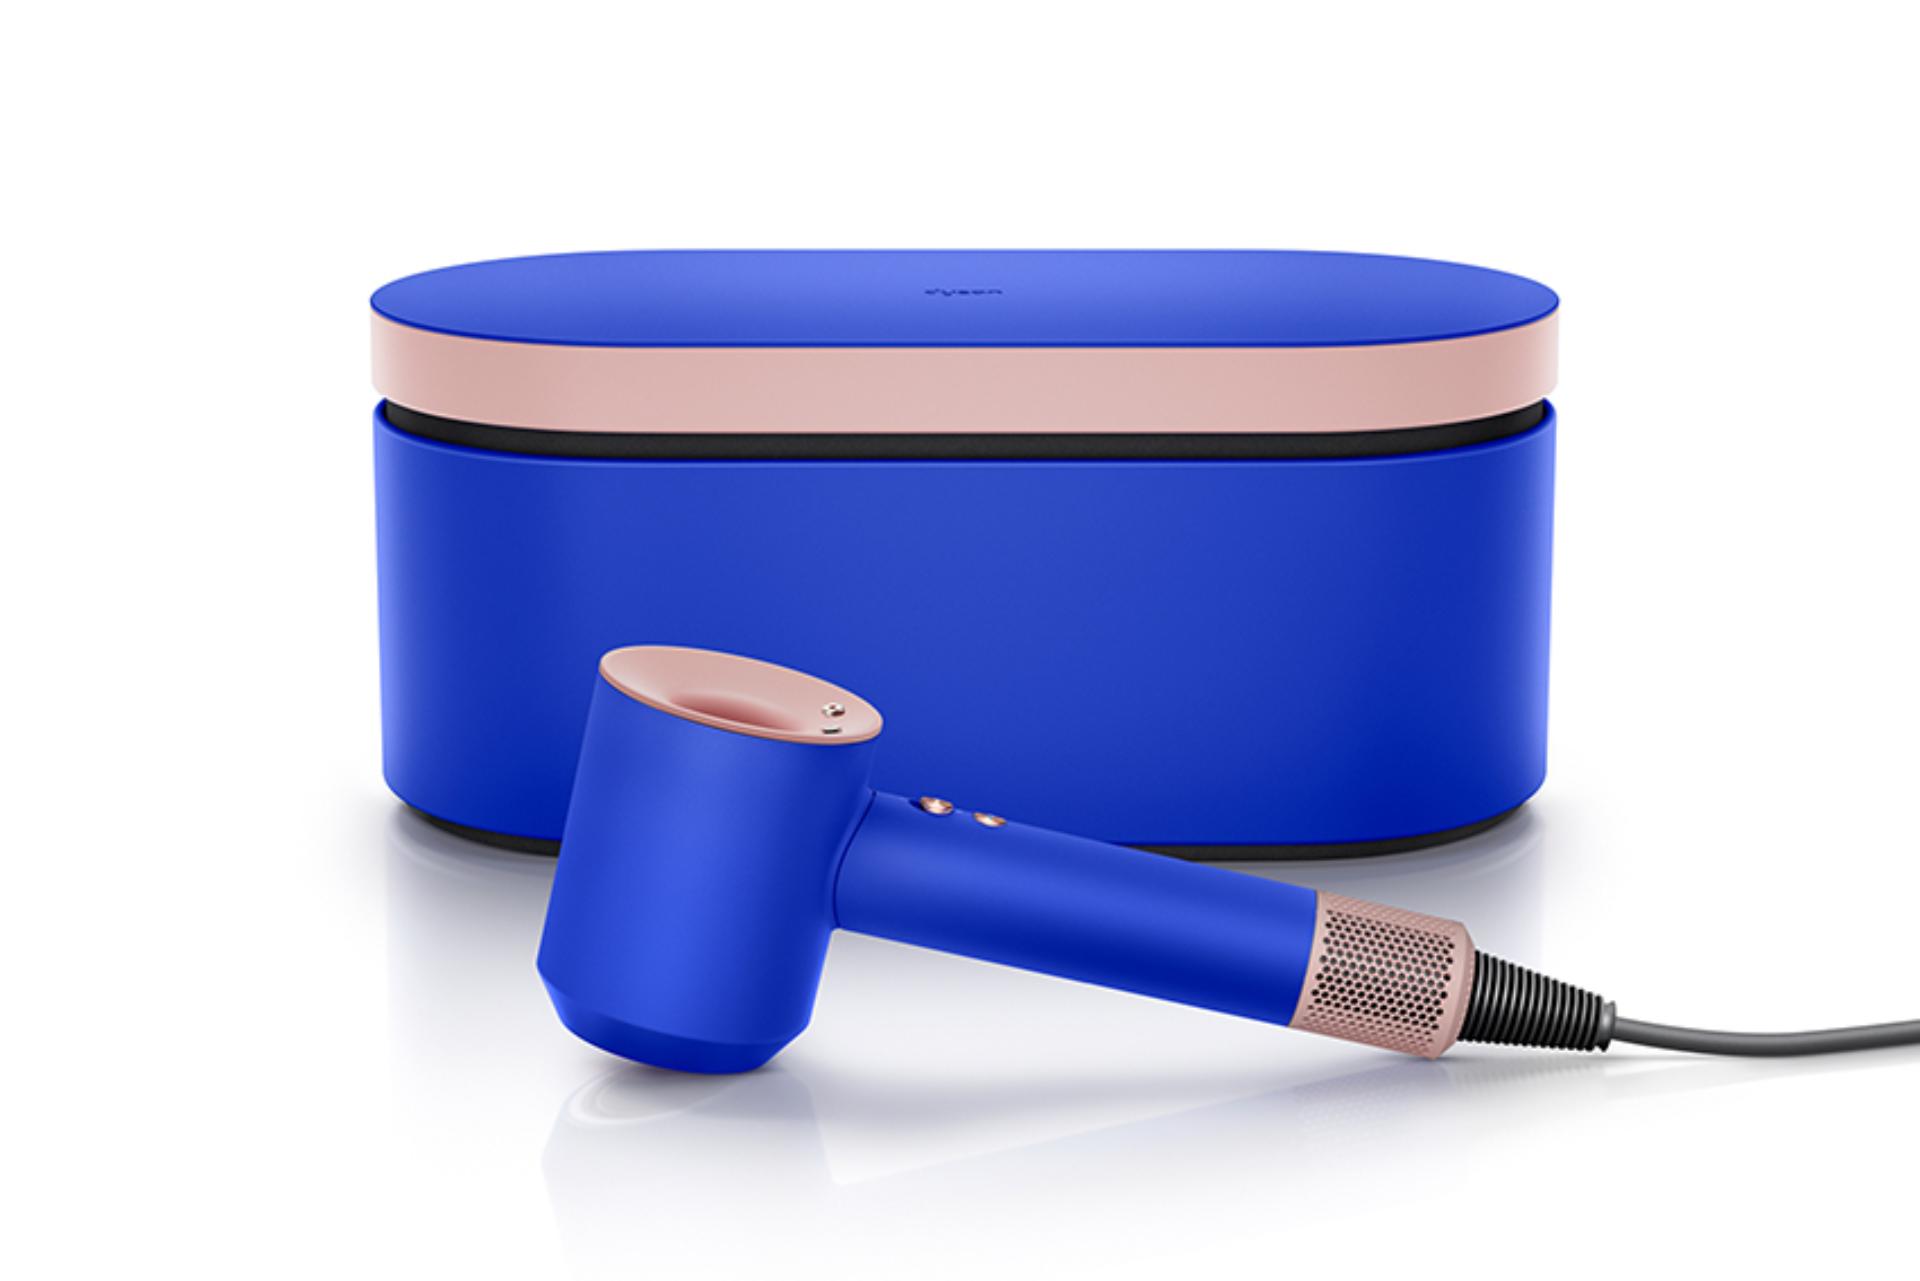 Dyson Supersonic hair dryer in the colour Blue Blush